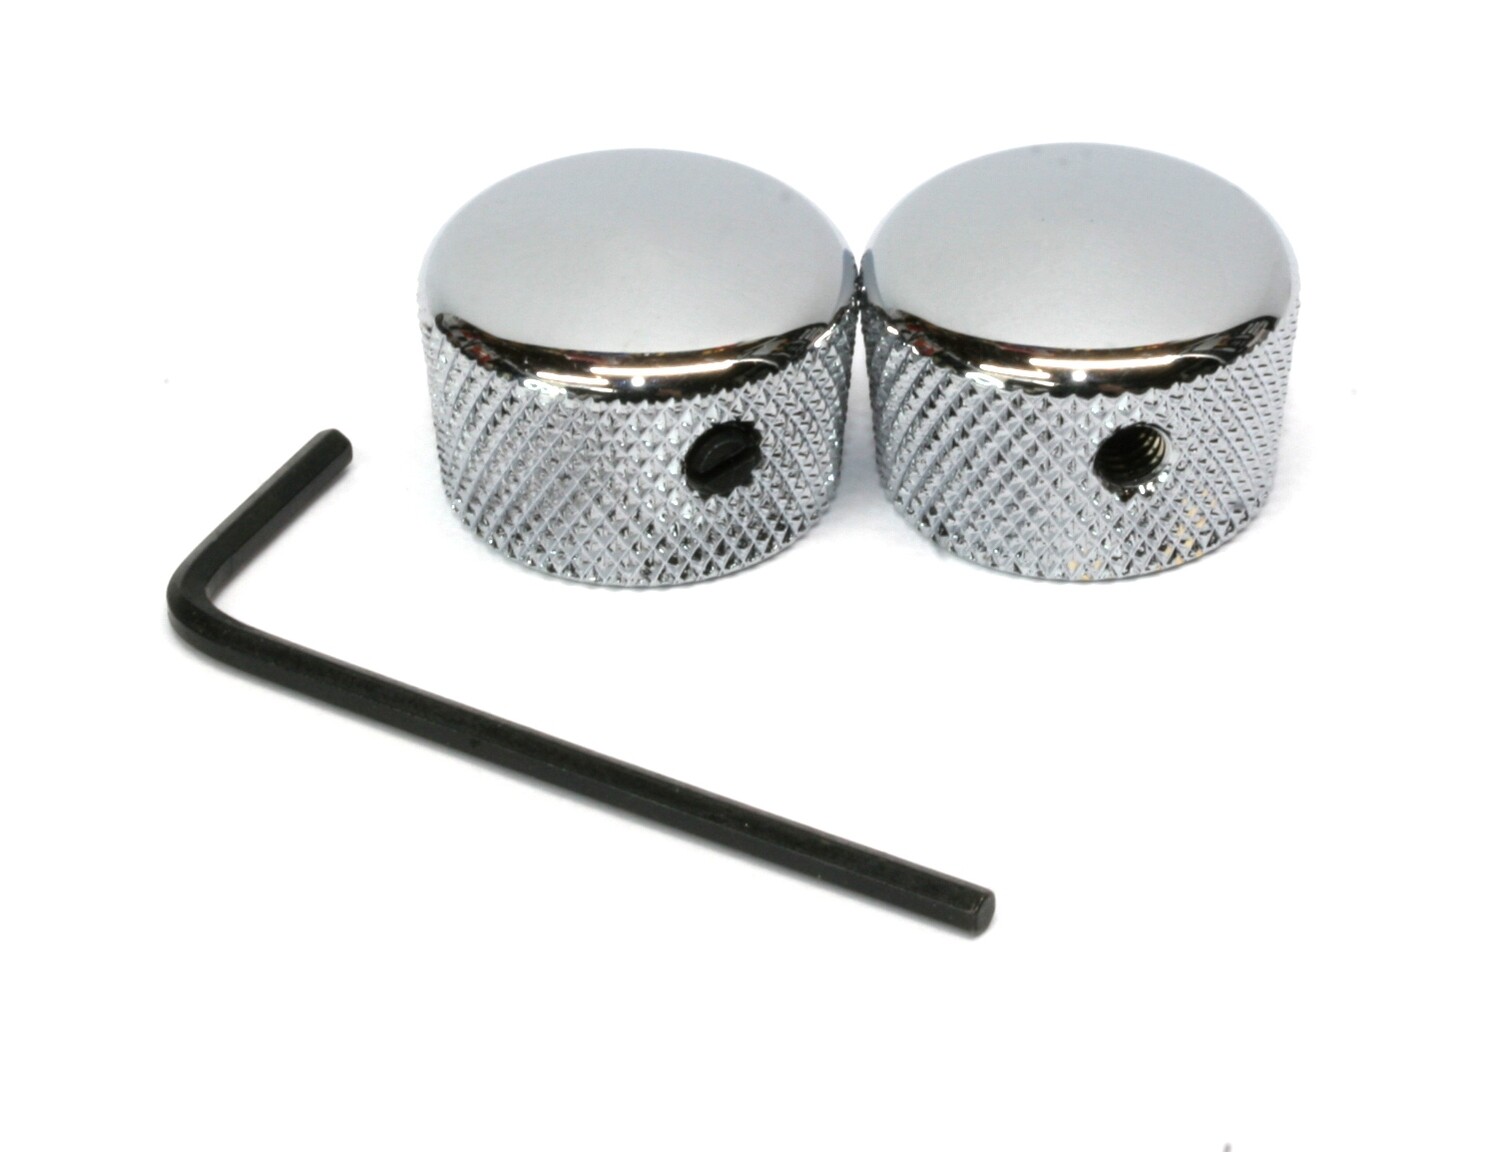 Chrome Cupcake metal knobs (2), with set screw, fits USA solid shaft pots.3/4" wide.